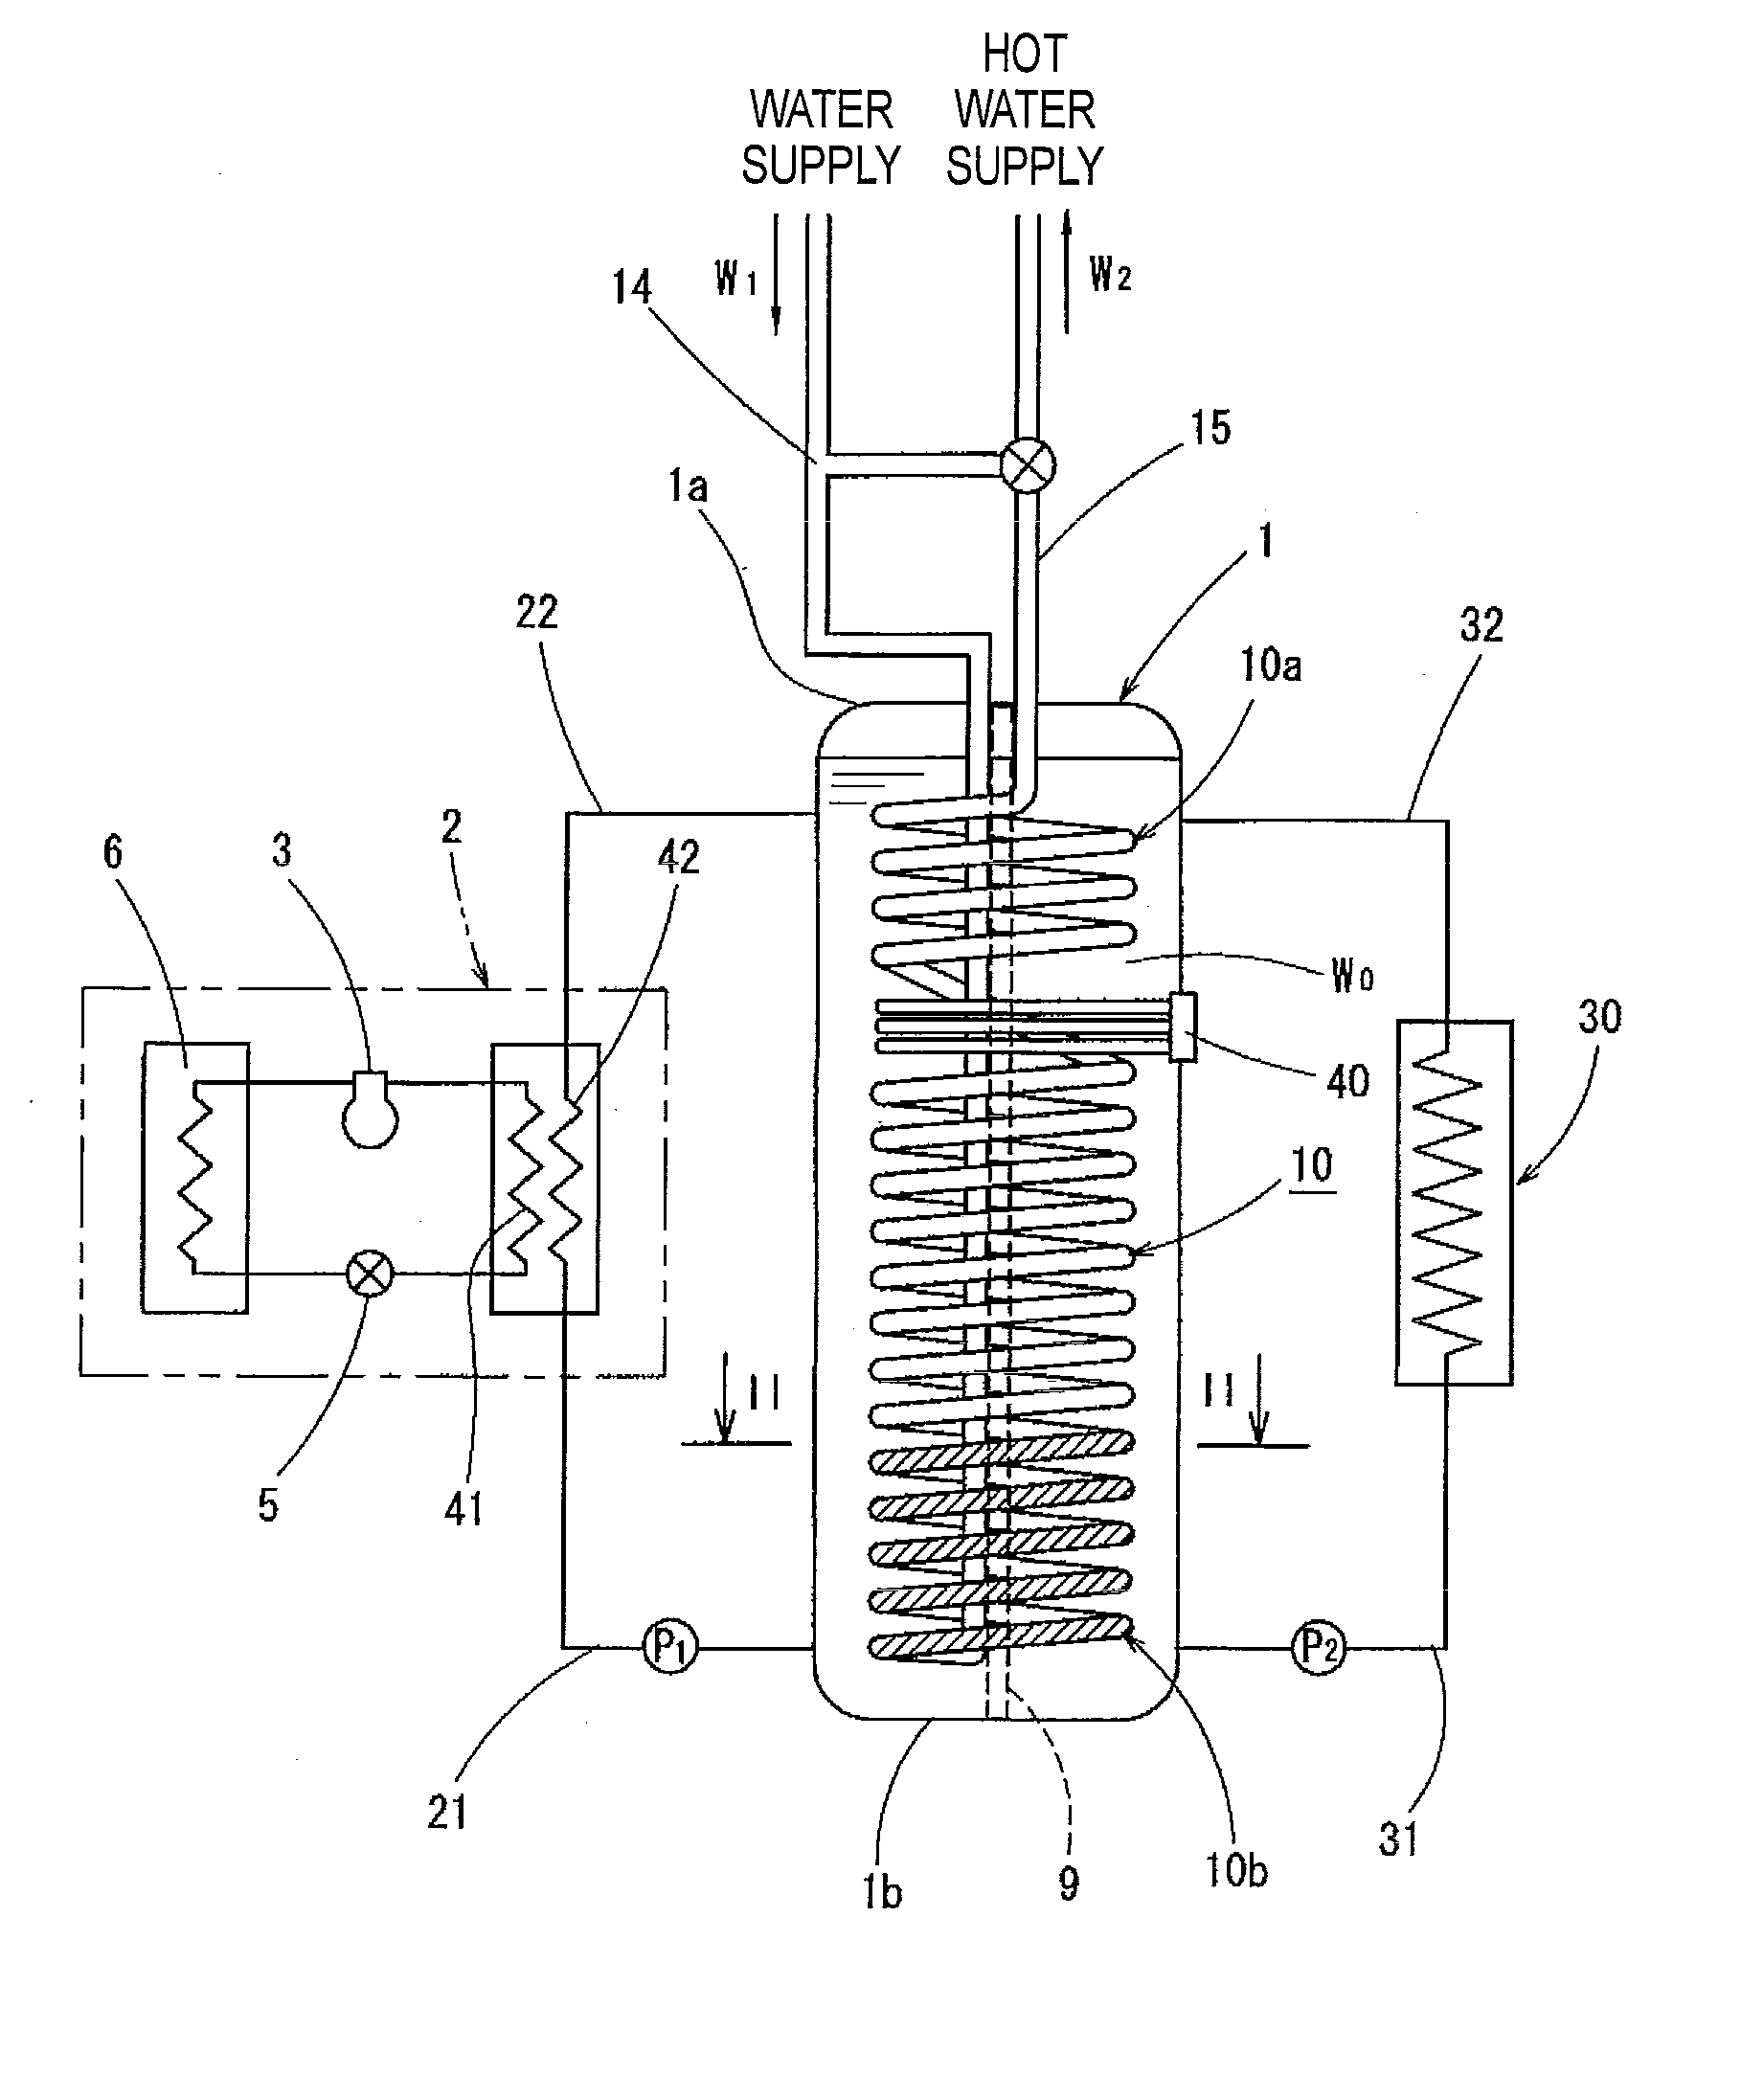 Heat pump type hot water supply apparatus and heating and hot water supply apparatus